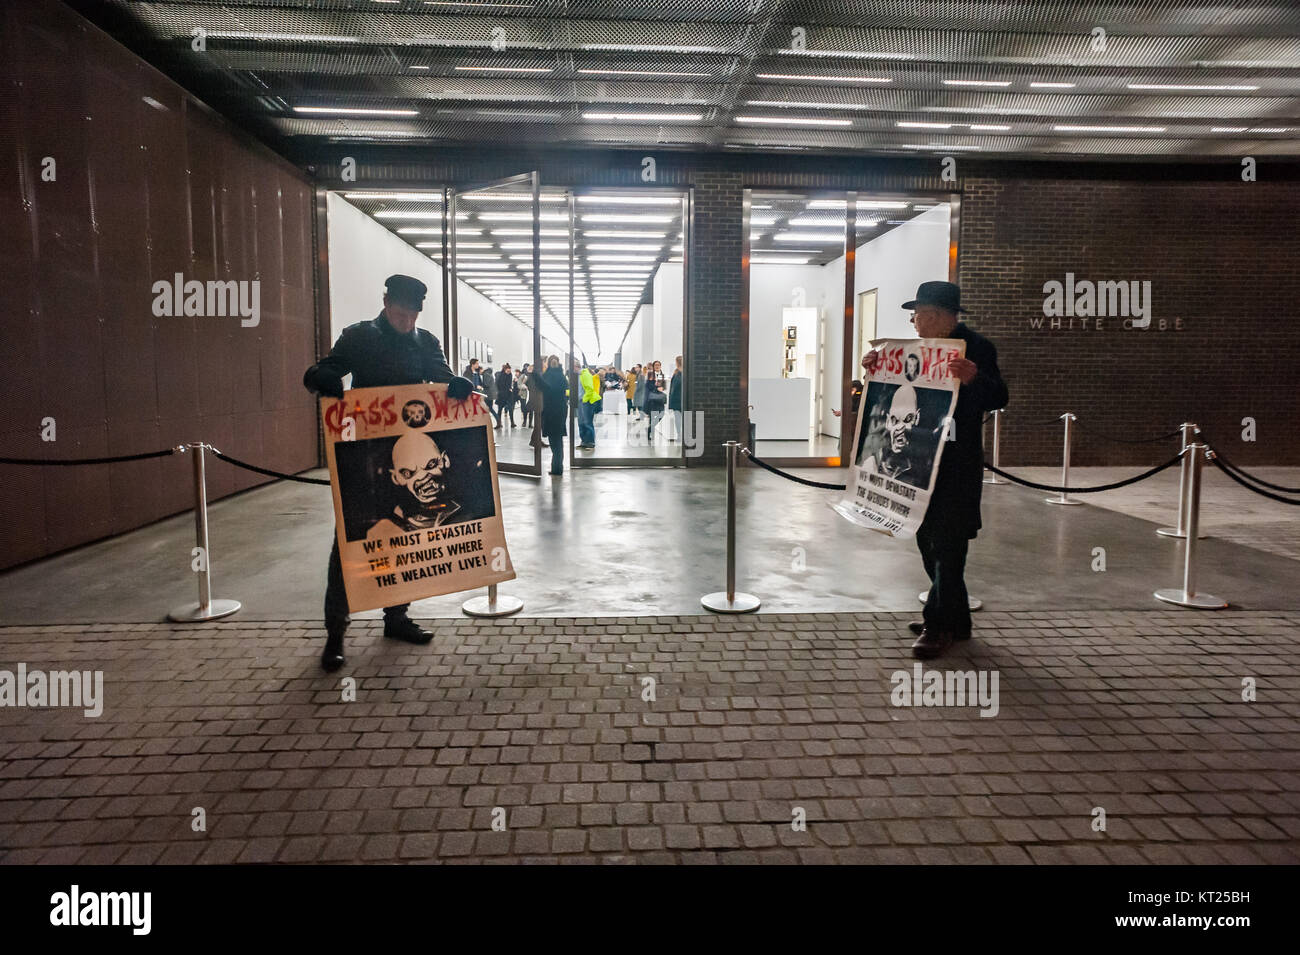 Simon Elmer & Ian Bone stand holding Class War posters at the entrance to the White Cube gallery which is showing Gilbert & George's 'Banners'.2 Stock Photo